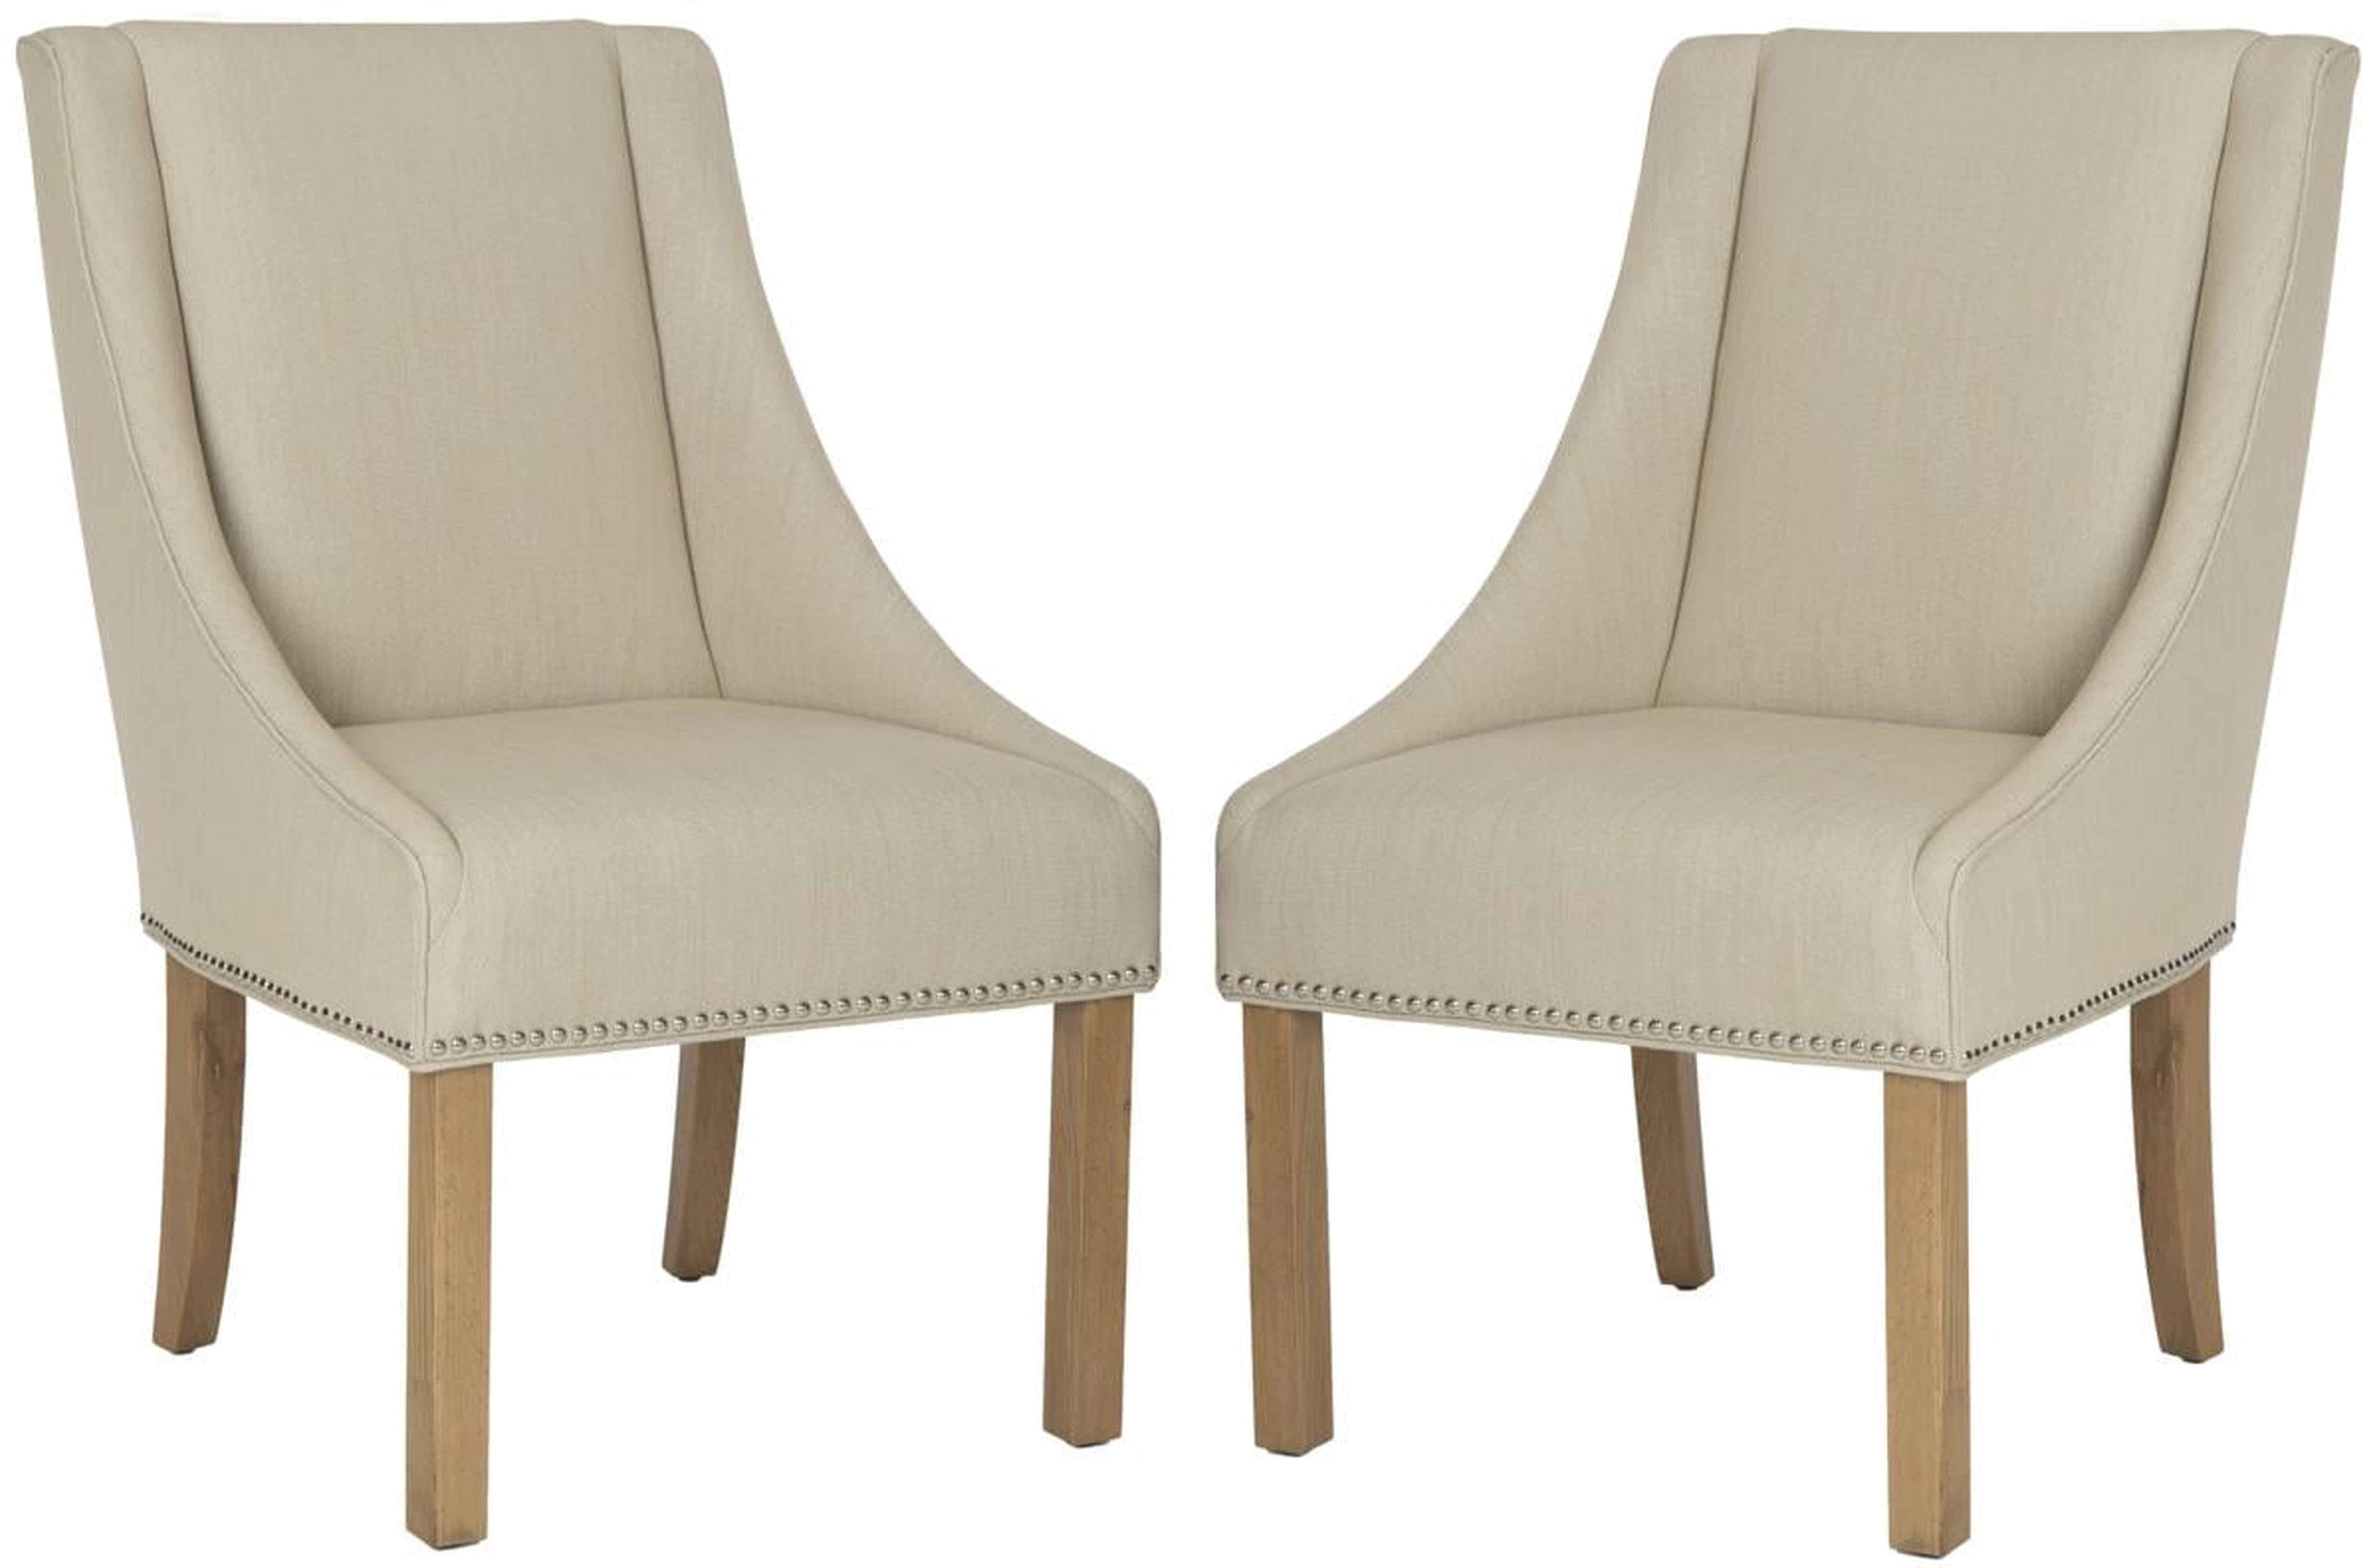 Morris 20''H Sloping Arm Dining Chair (Set Of 2) - Silver Nail Heads - Biege/Weathered Oak - Safavieh - Arlo Home